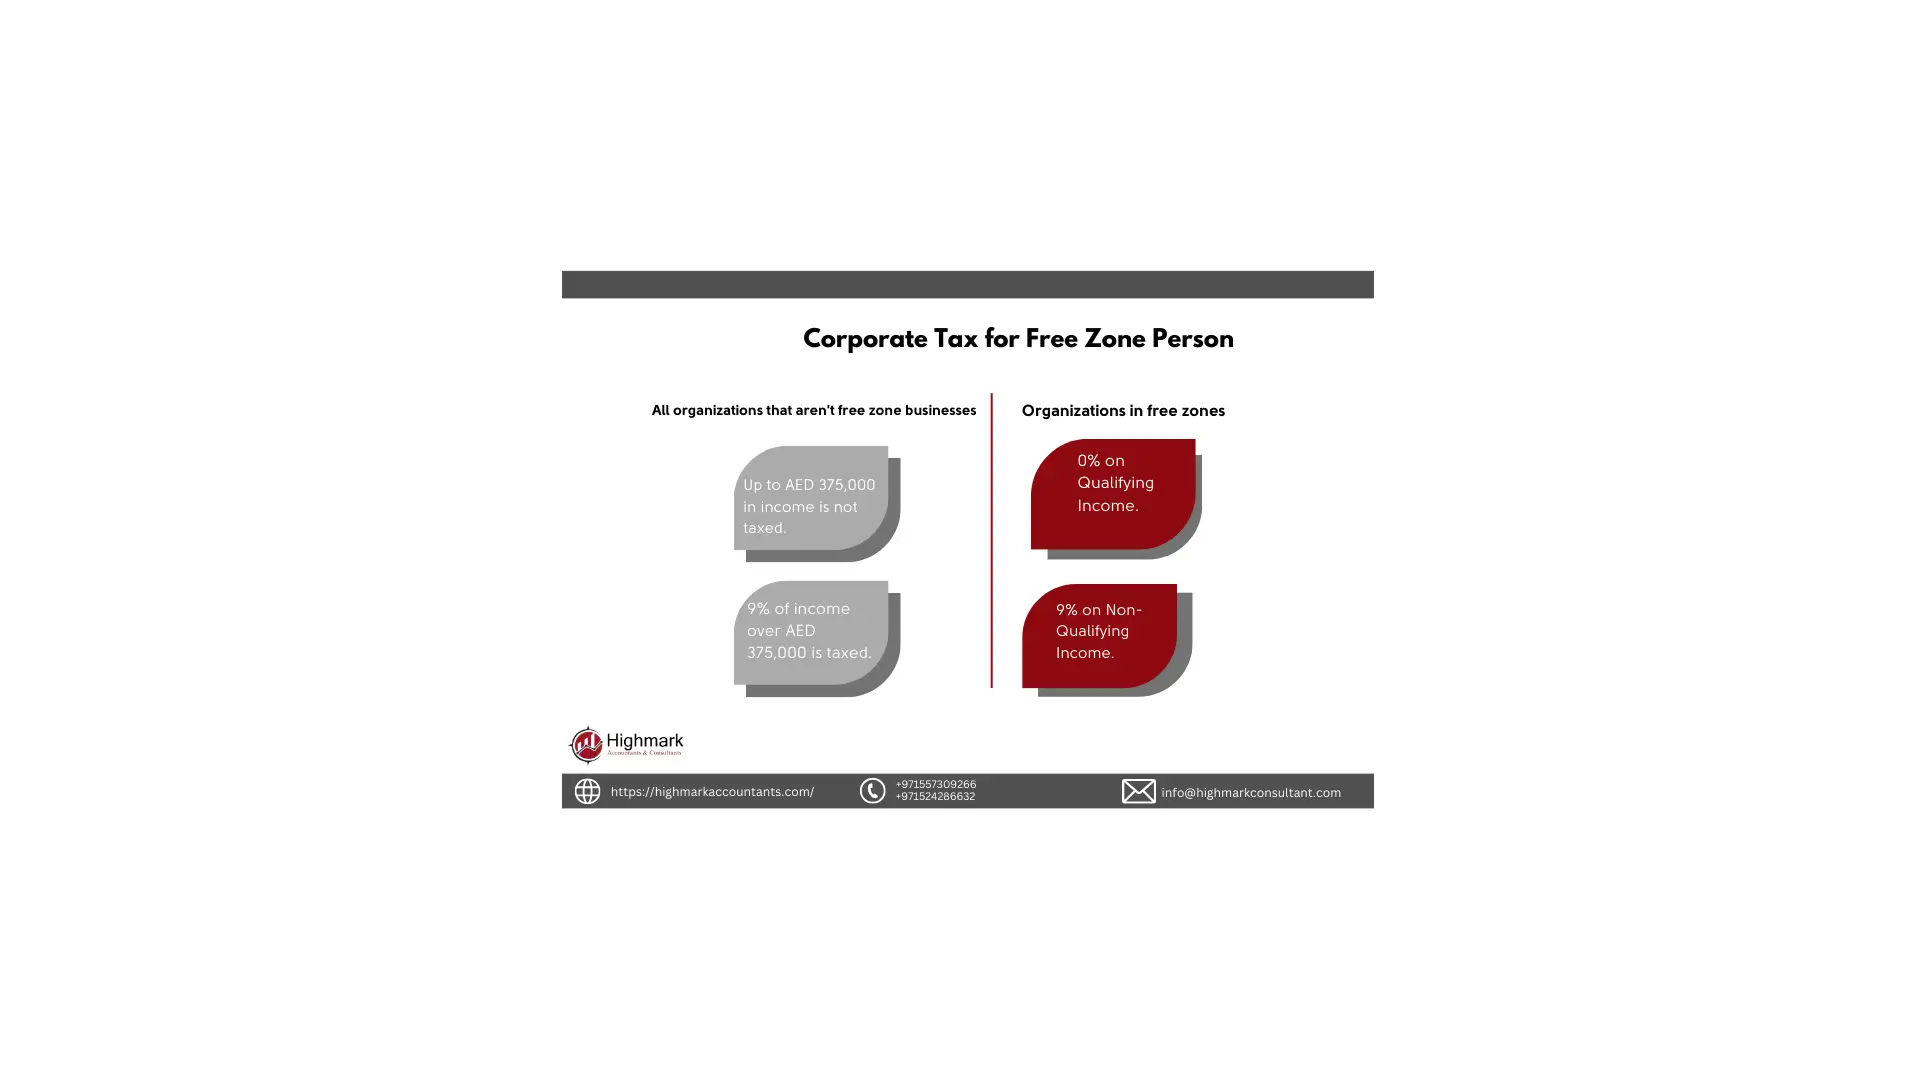 Overview of Corporate tax in UAE